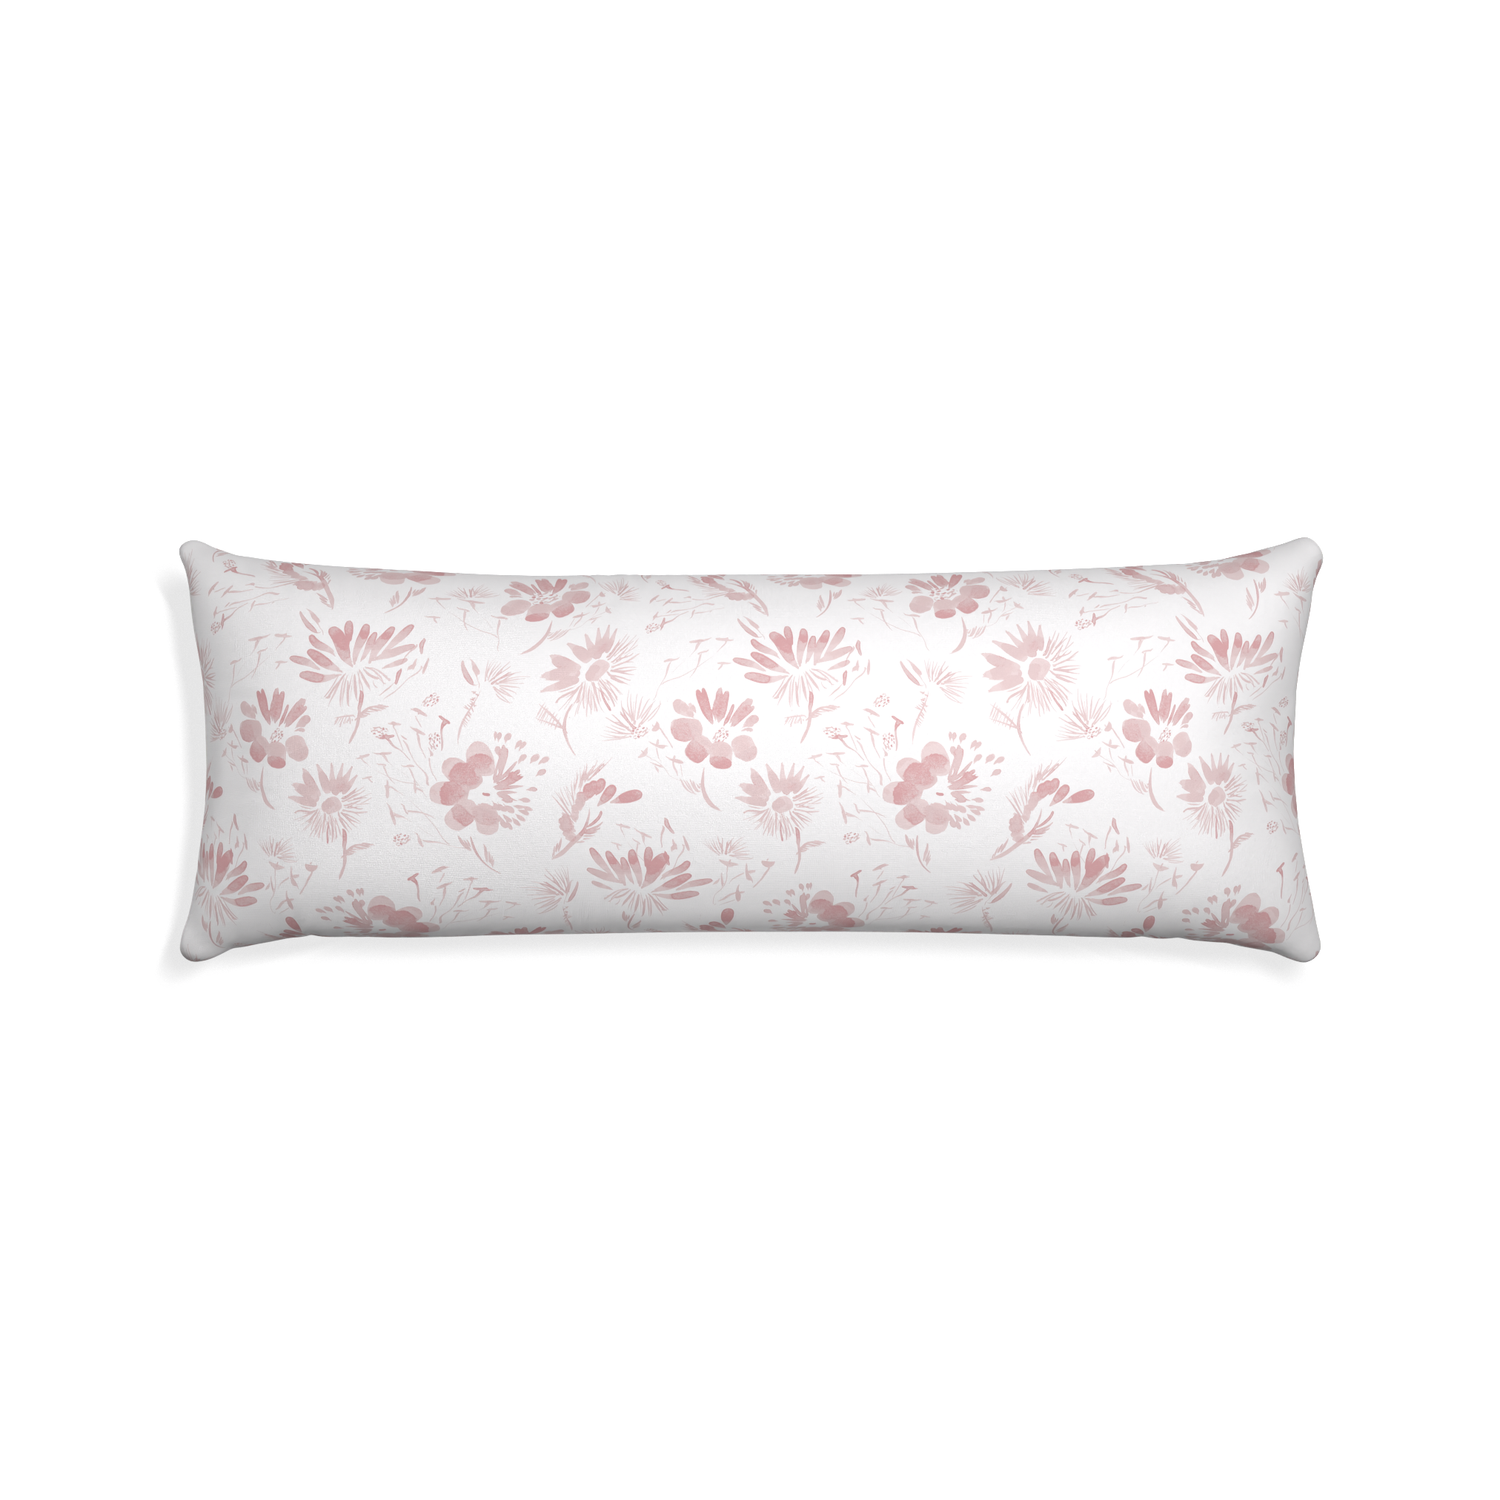 Xl-lumbar blake custom pink floralpillow with none on white background